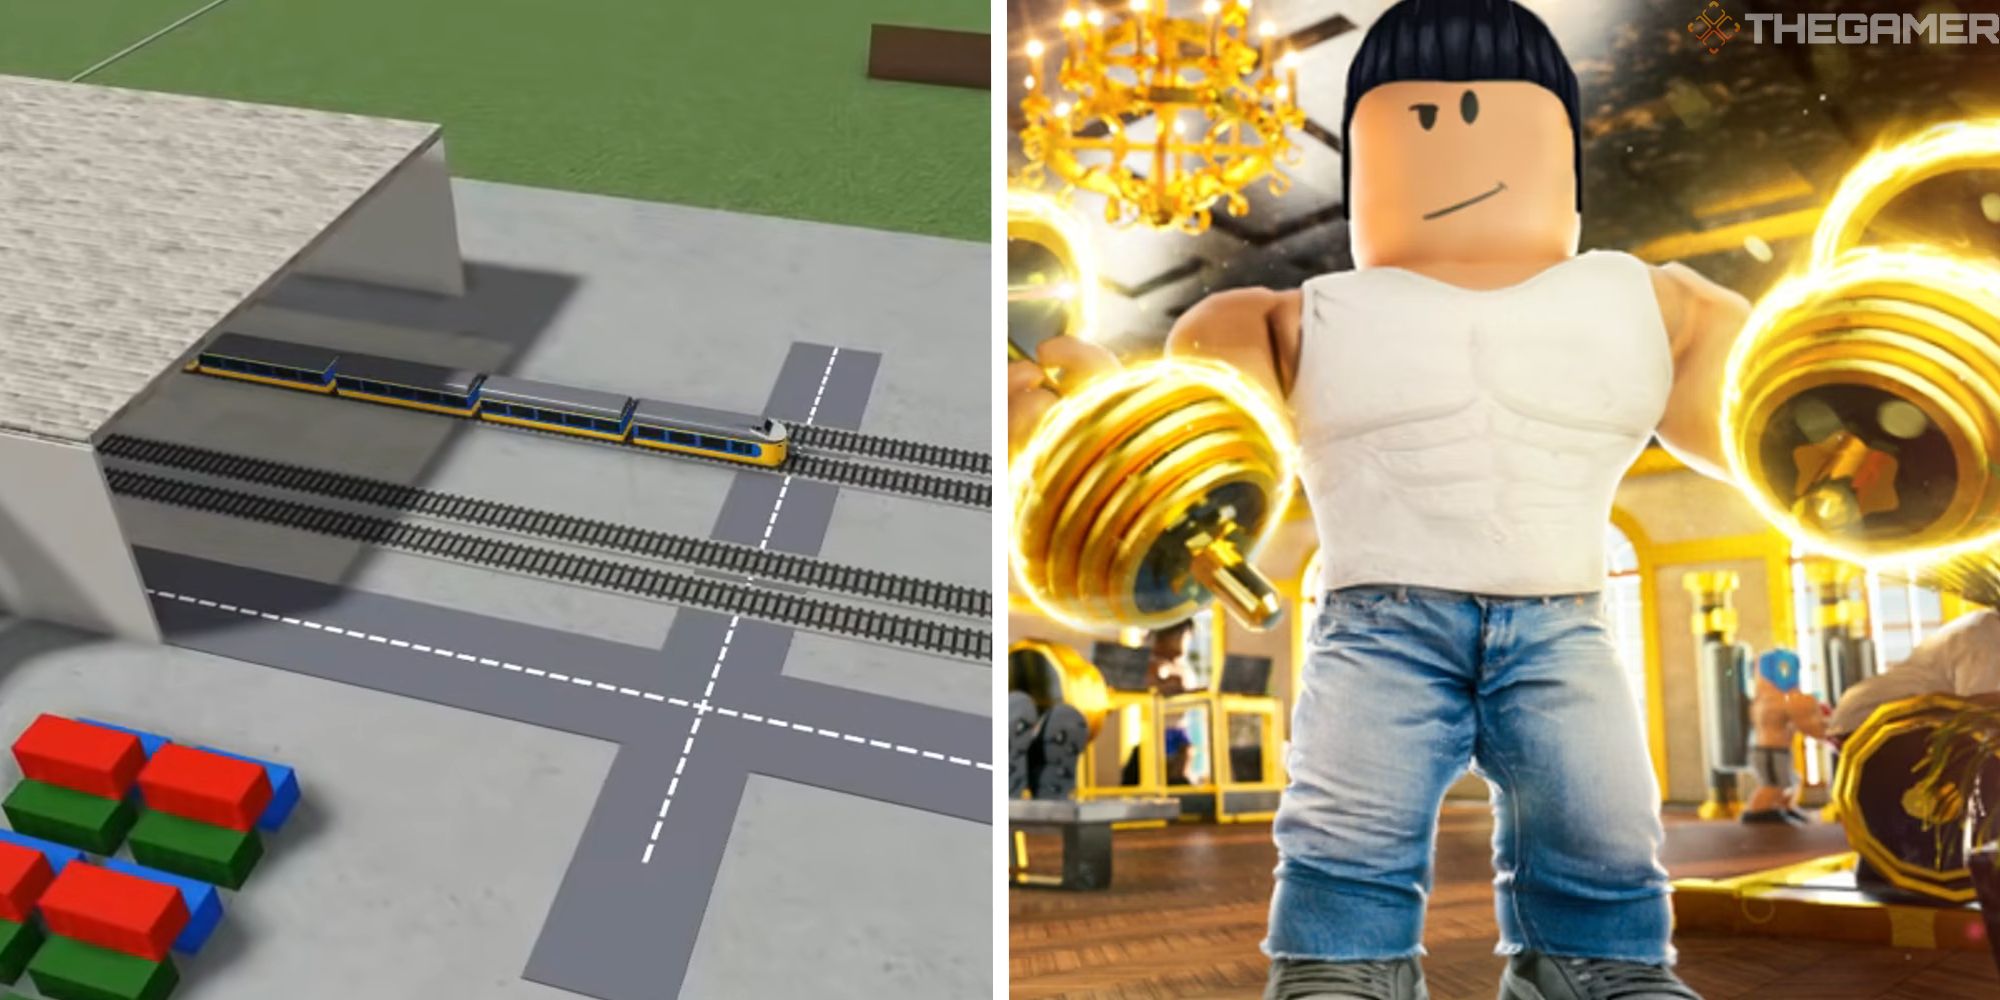 THE ROBLOX TYCOON 